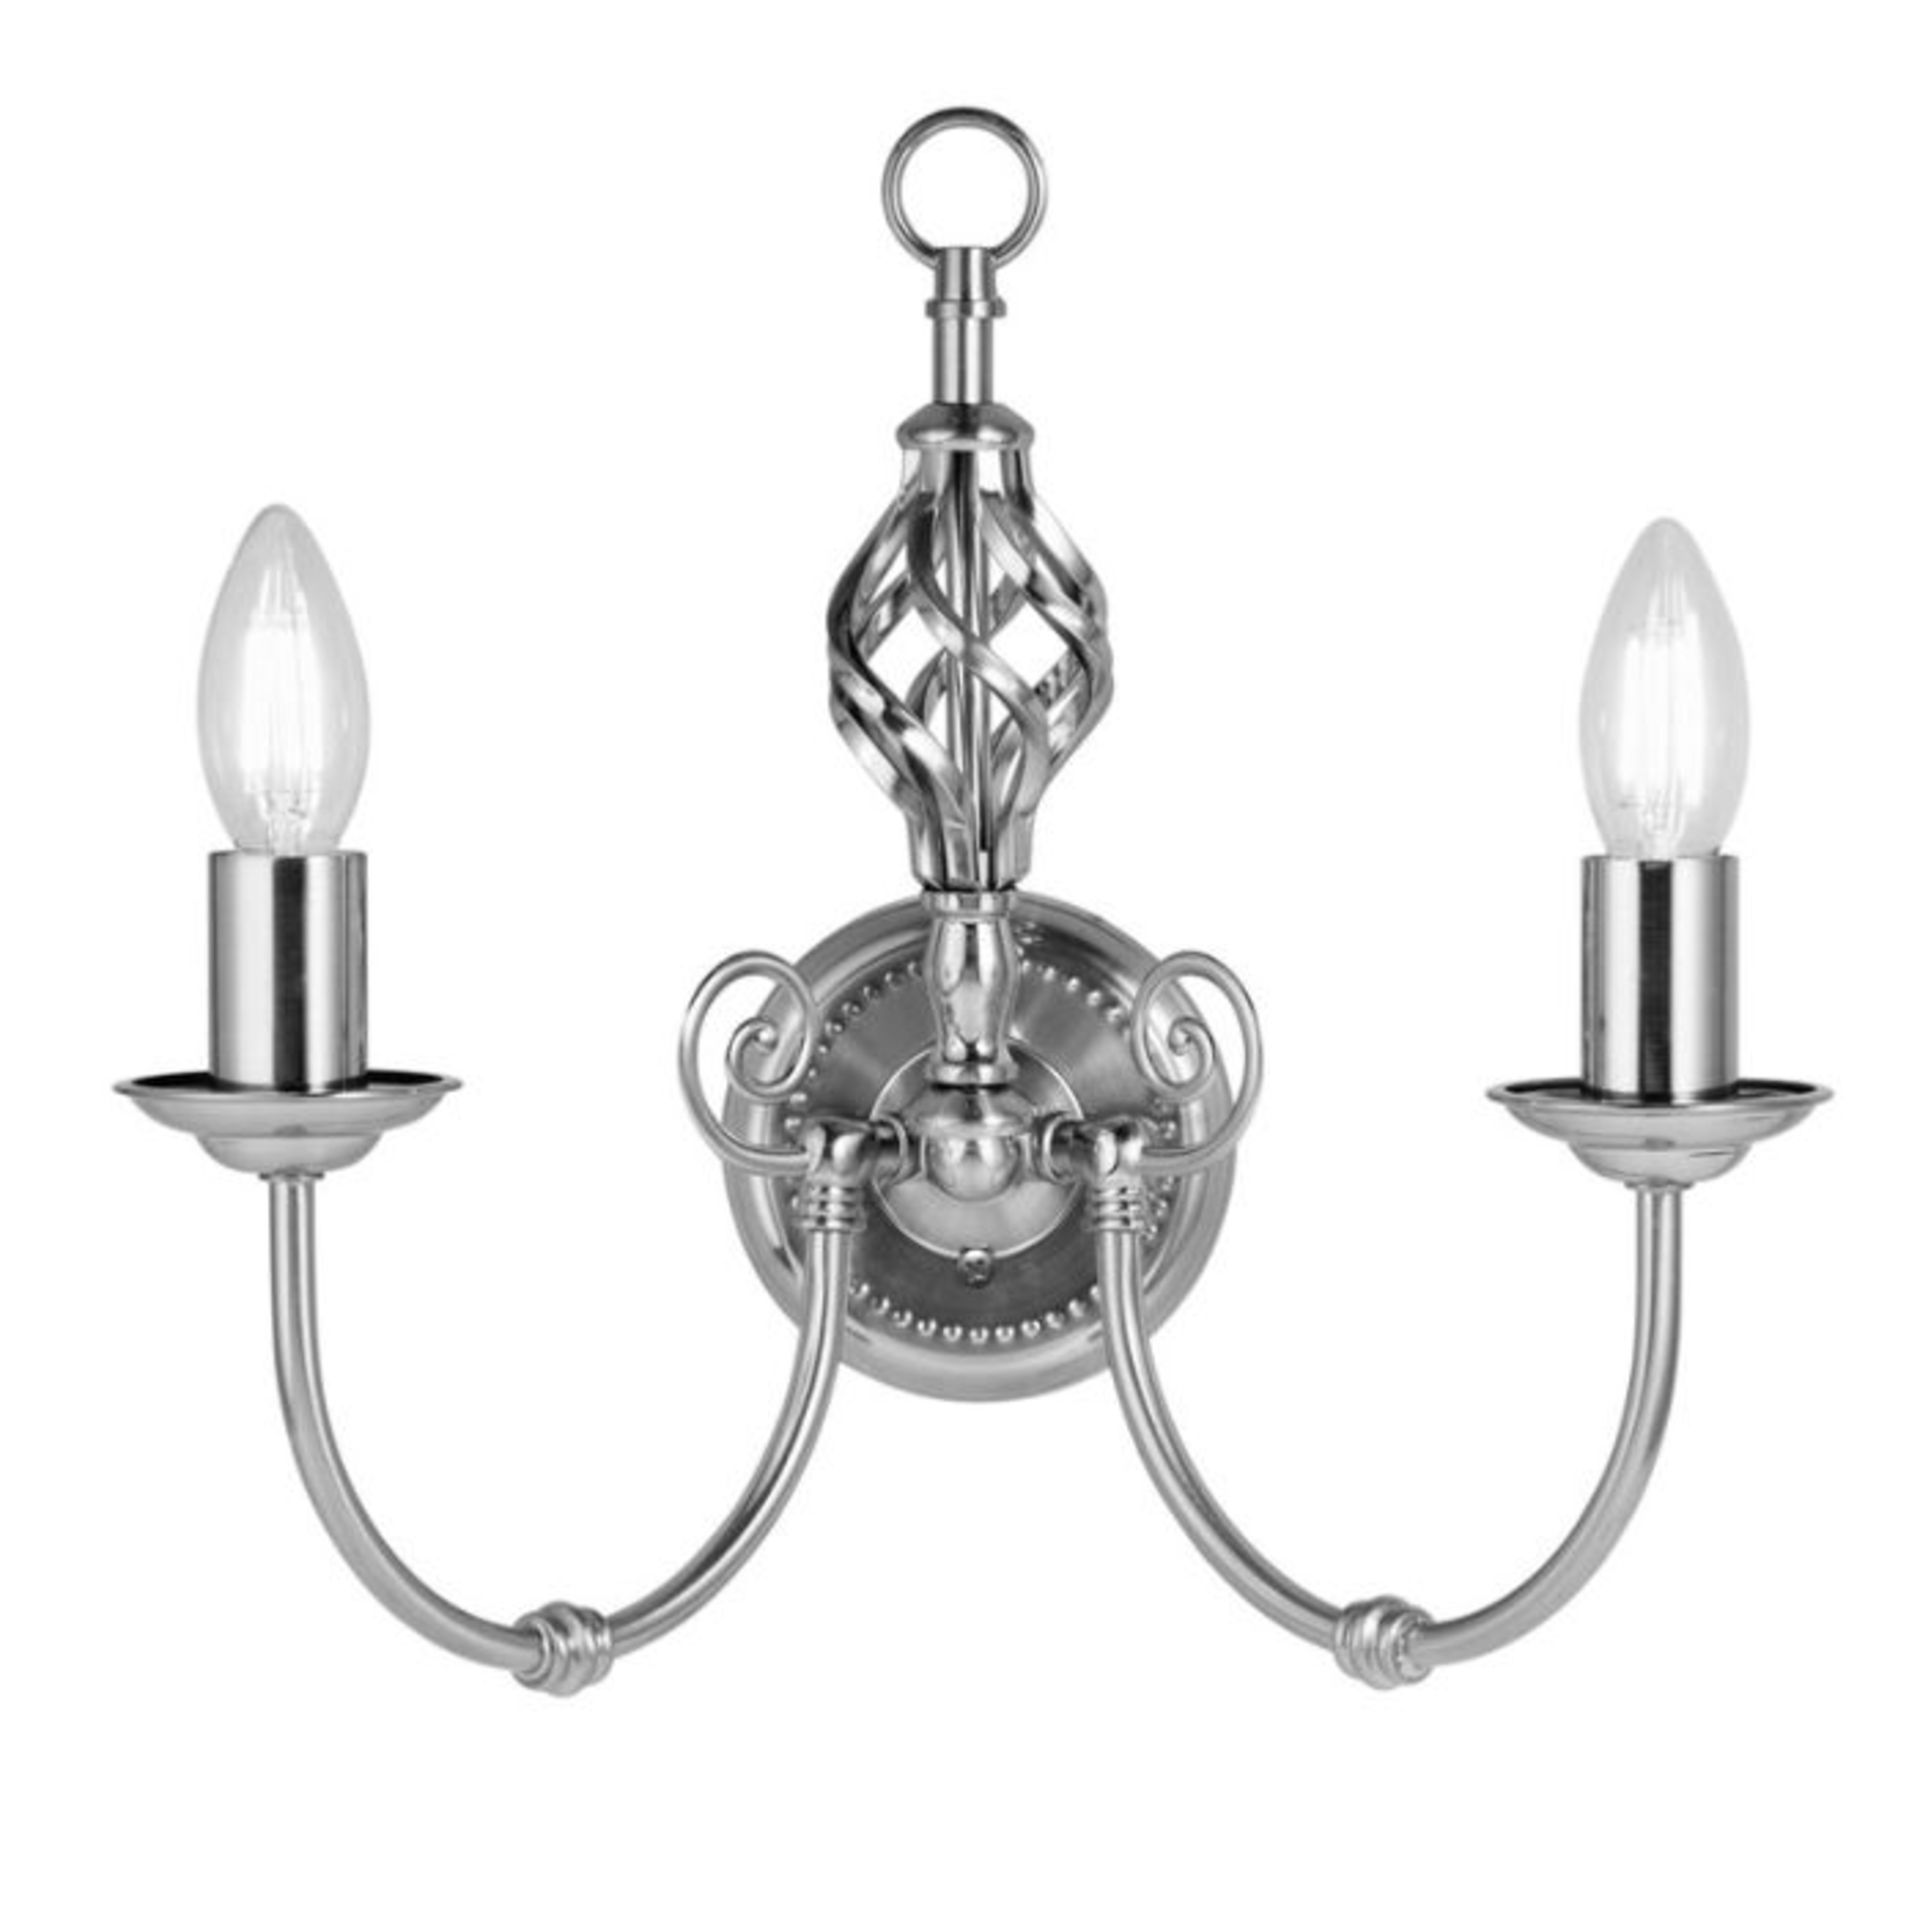 Three Pots , Bratton 2 - Light Dimmable Silver Candle Wall Light - RRP £38.99 (MEXP1199 - 24594)